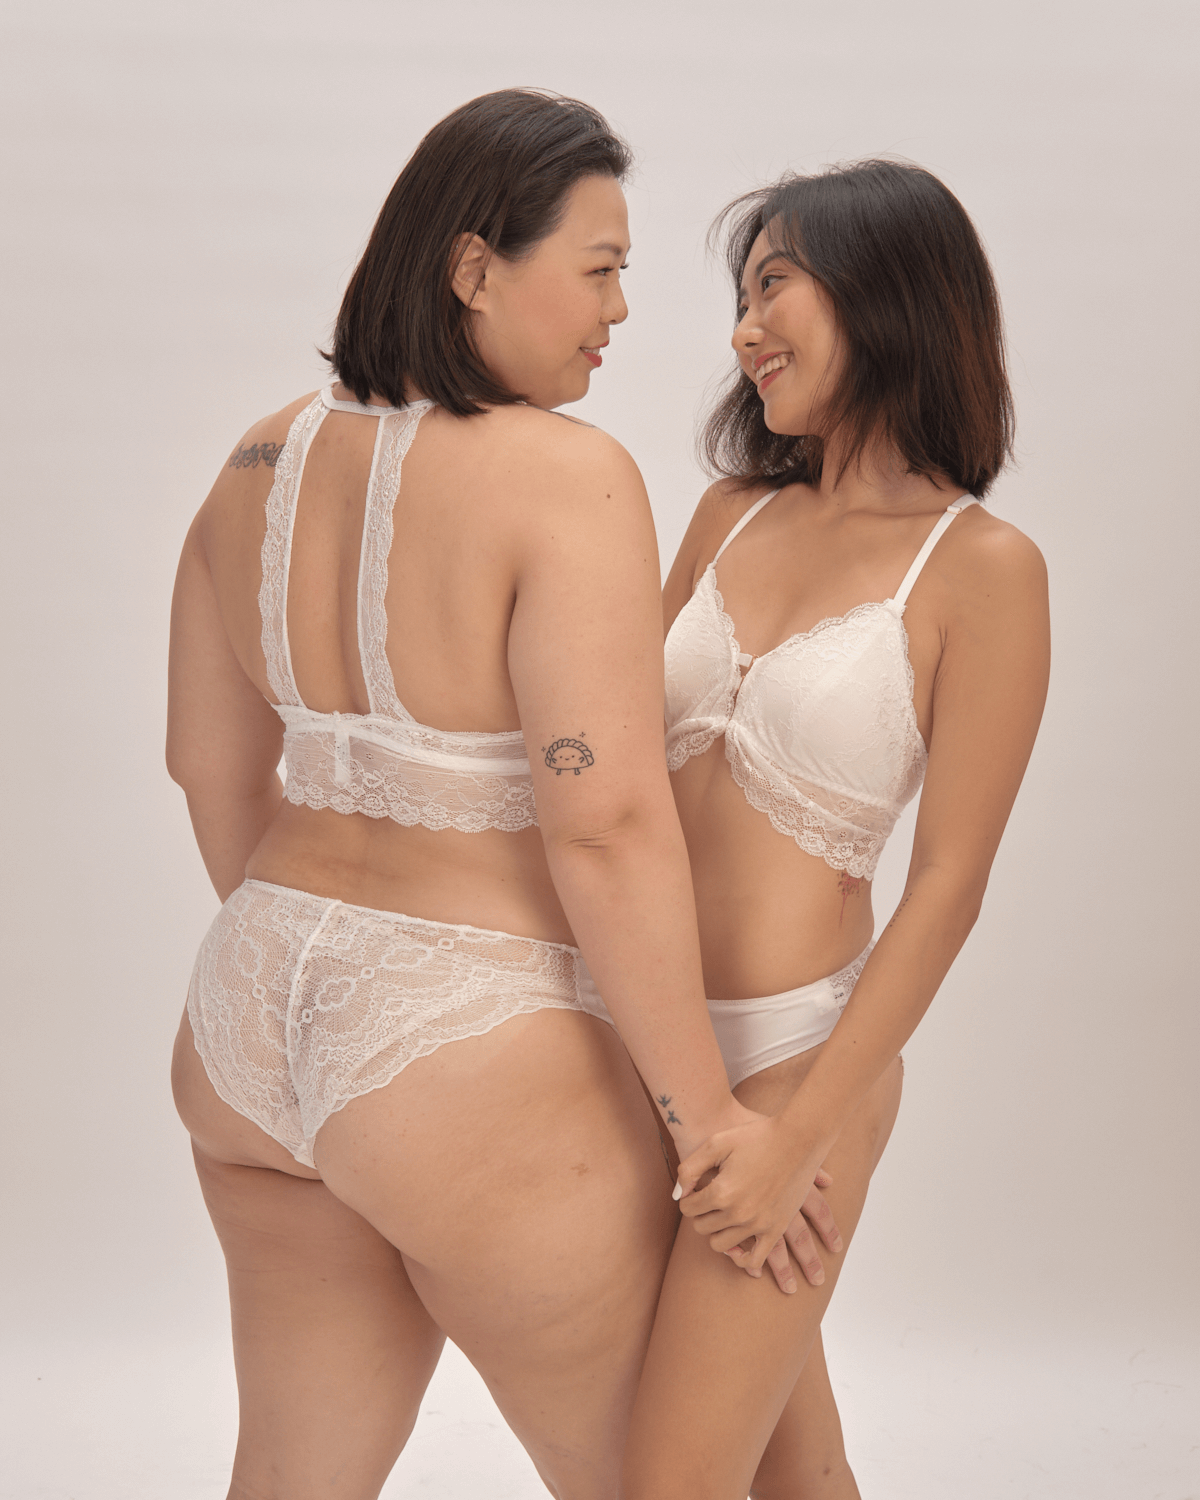 best wishes front close midi bralette in white